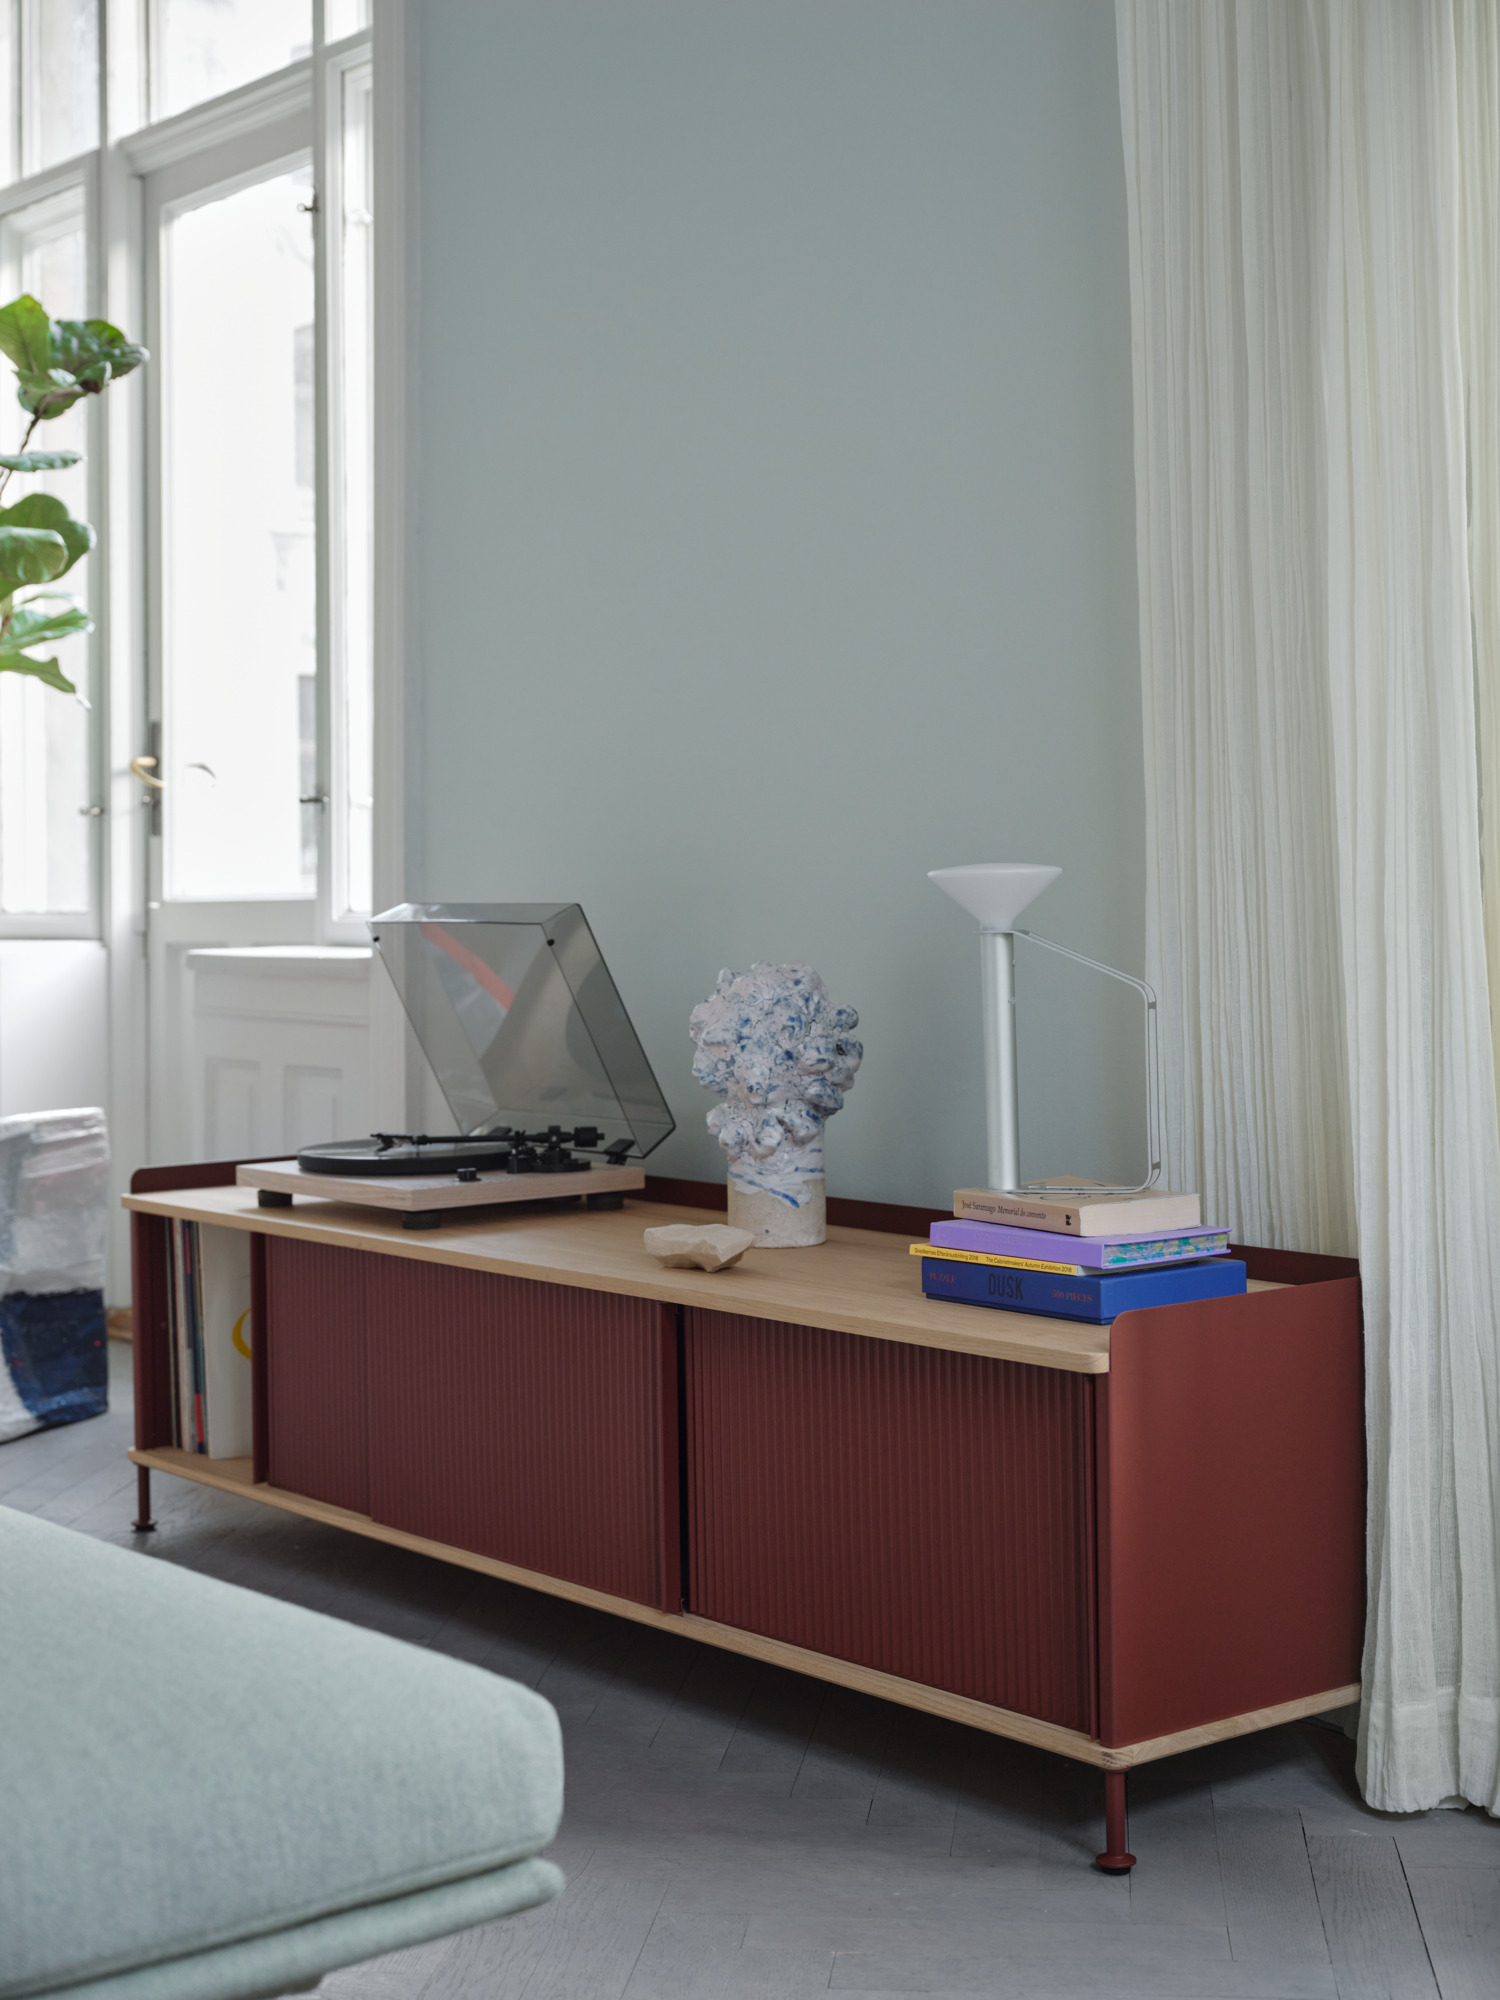 Enfold Sideboard 186x45 H48 cm in Deep Red - Piton Portable Lampe in Aluminum - Outline Daybed in Ecriture 910/Aluminum